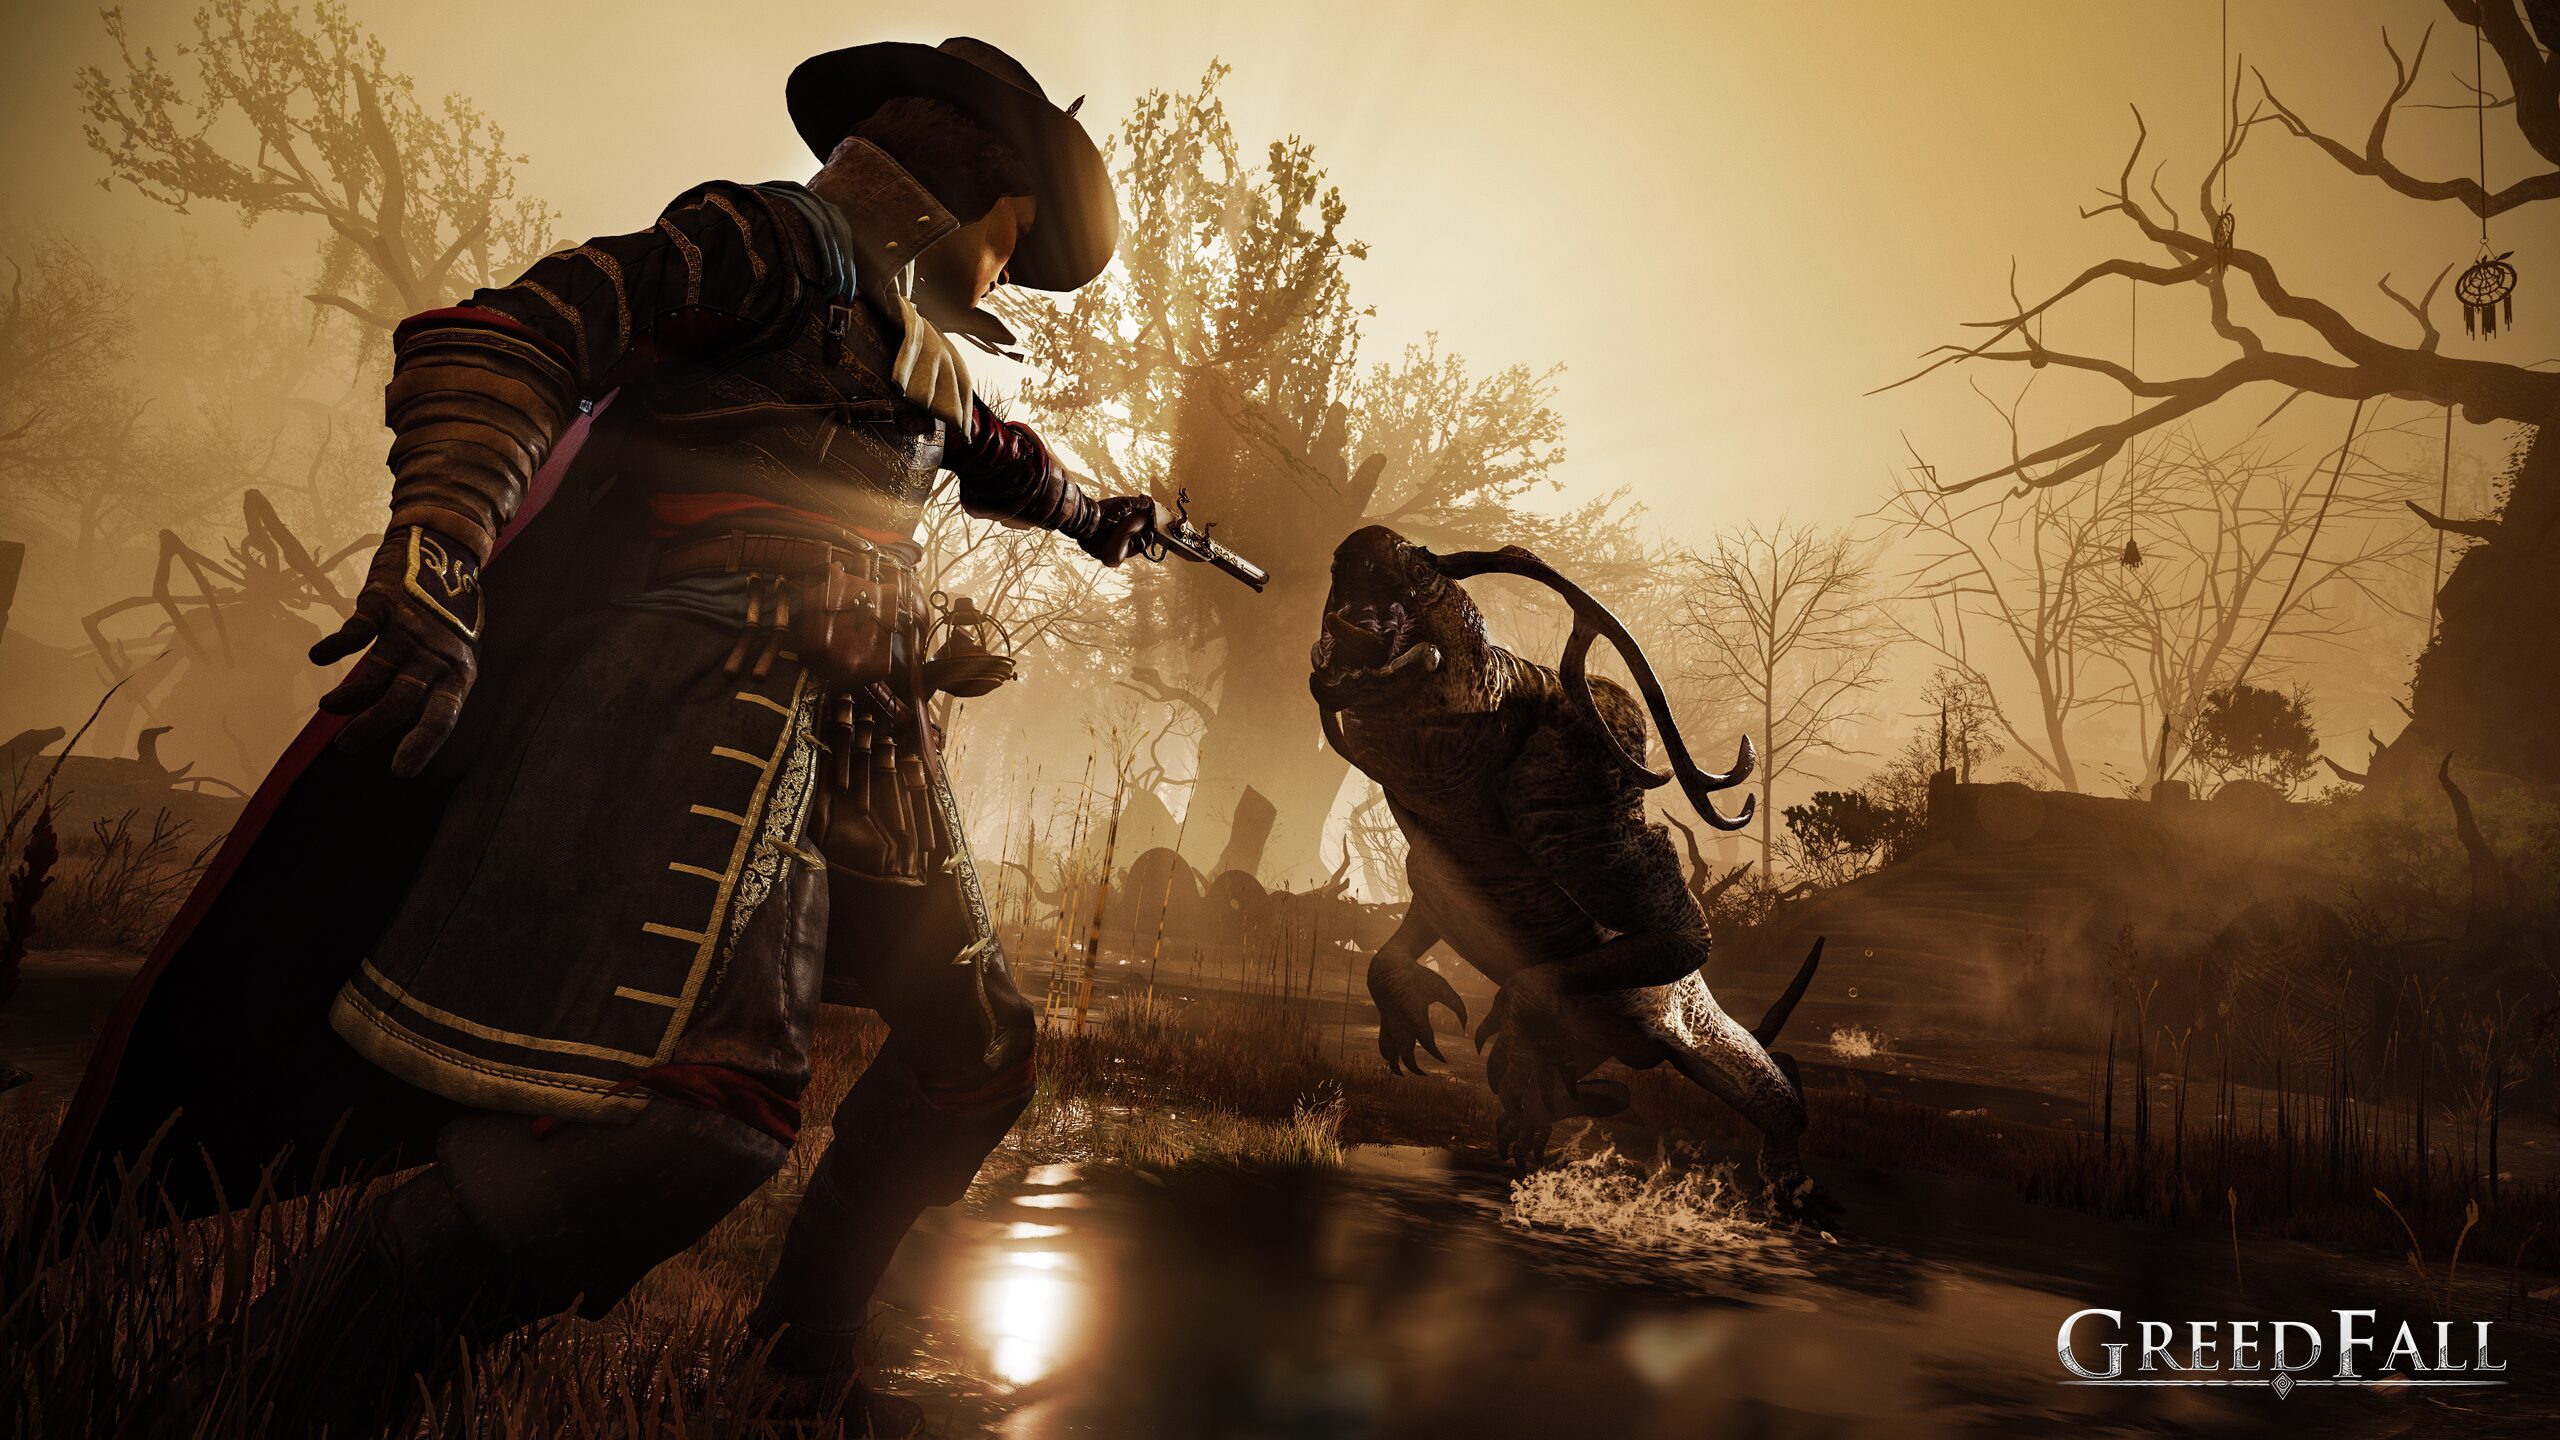 GreedFall gets intense story trailer ahead of E3 2019